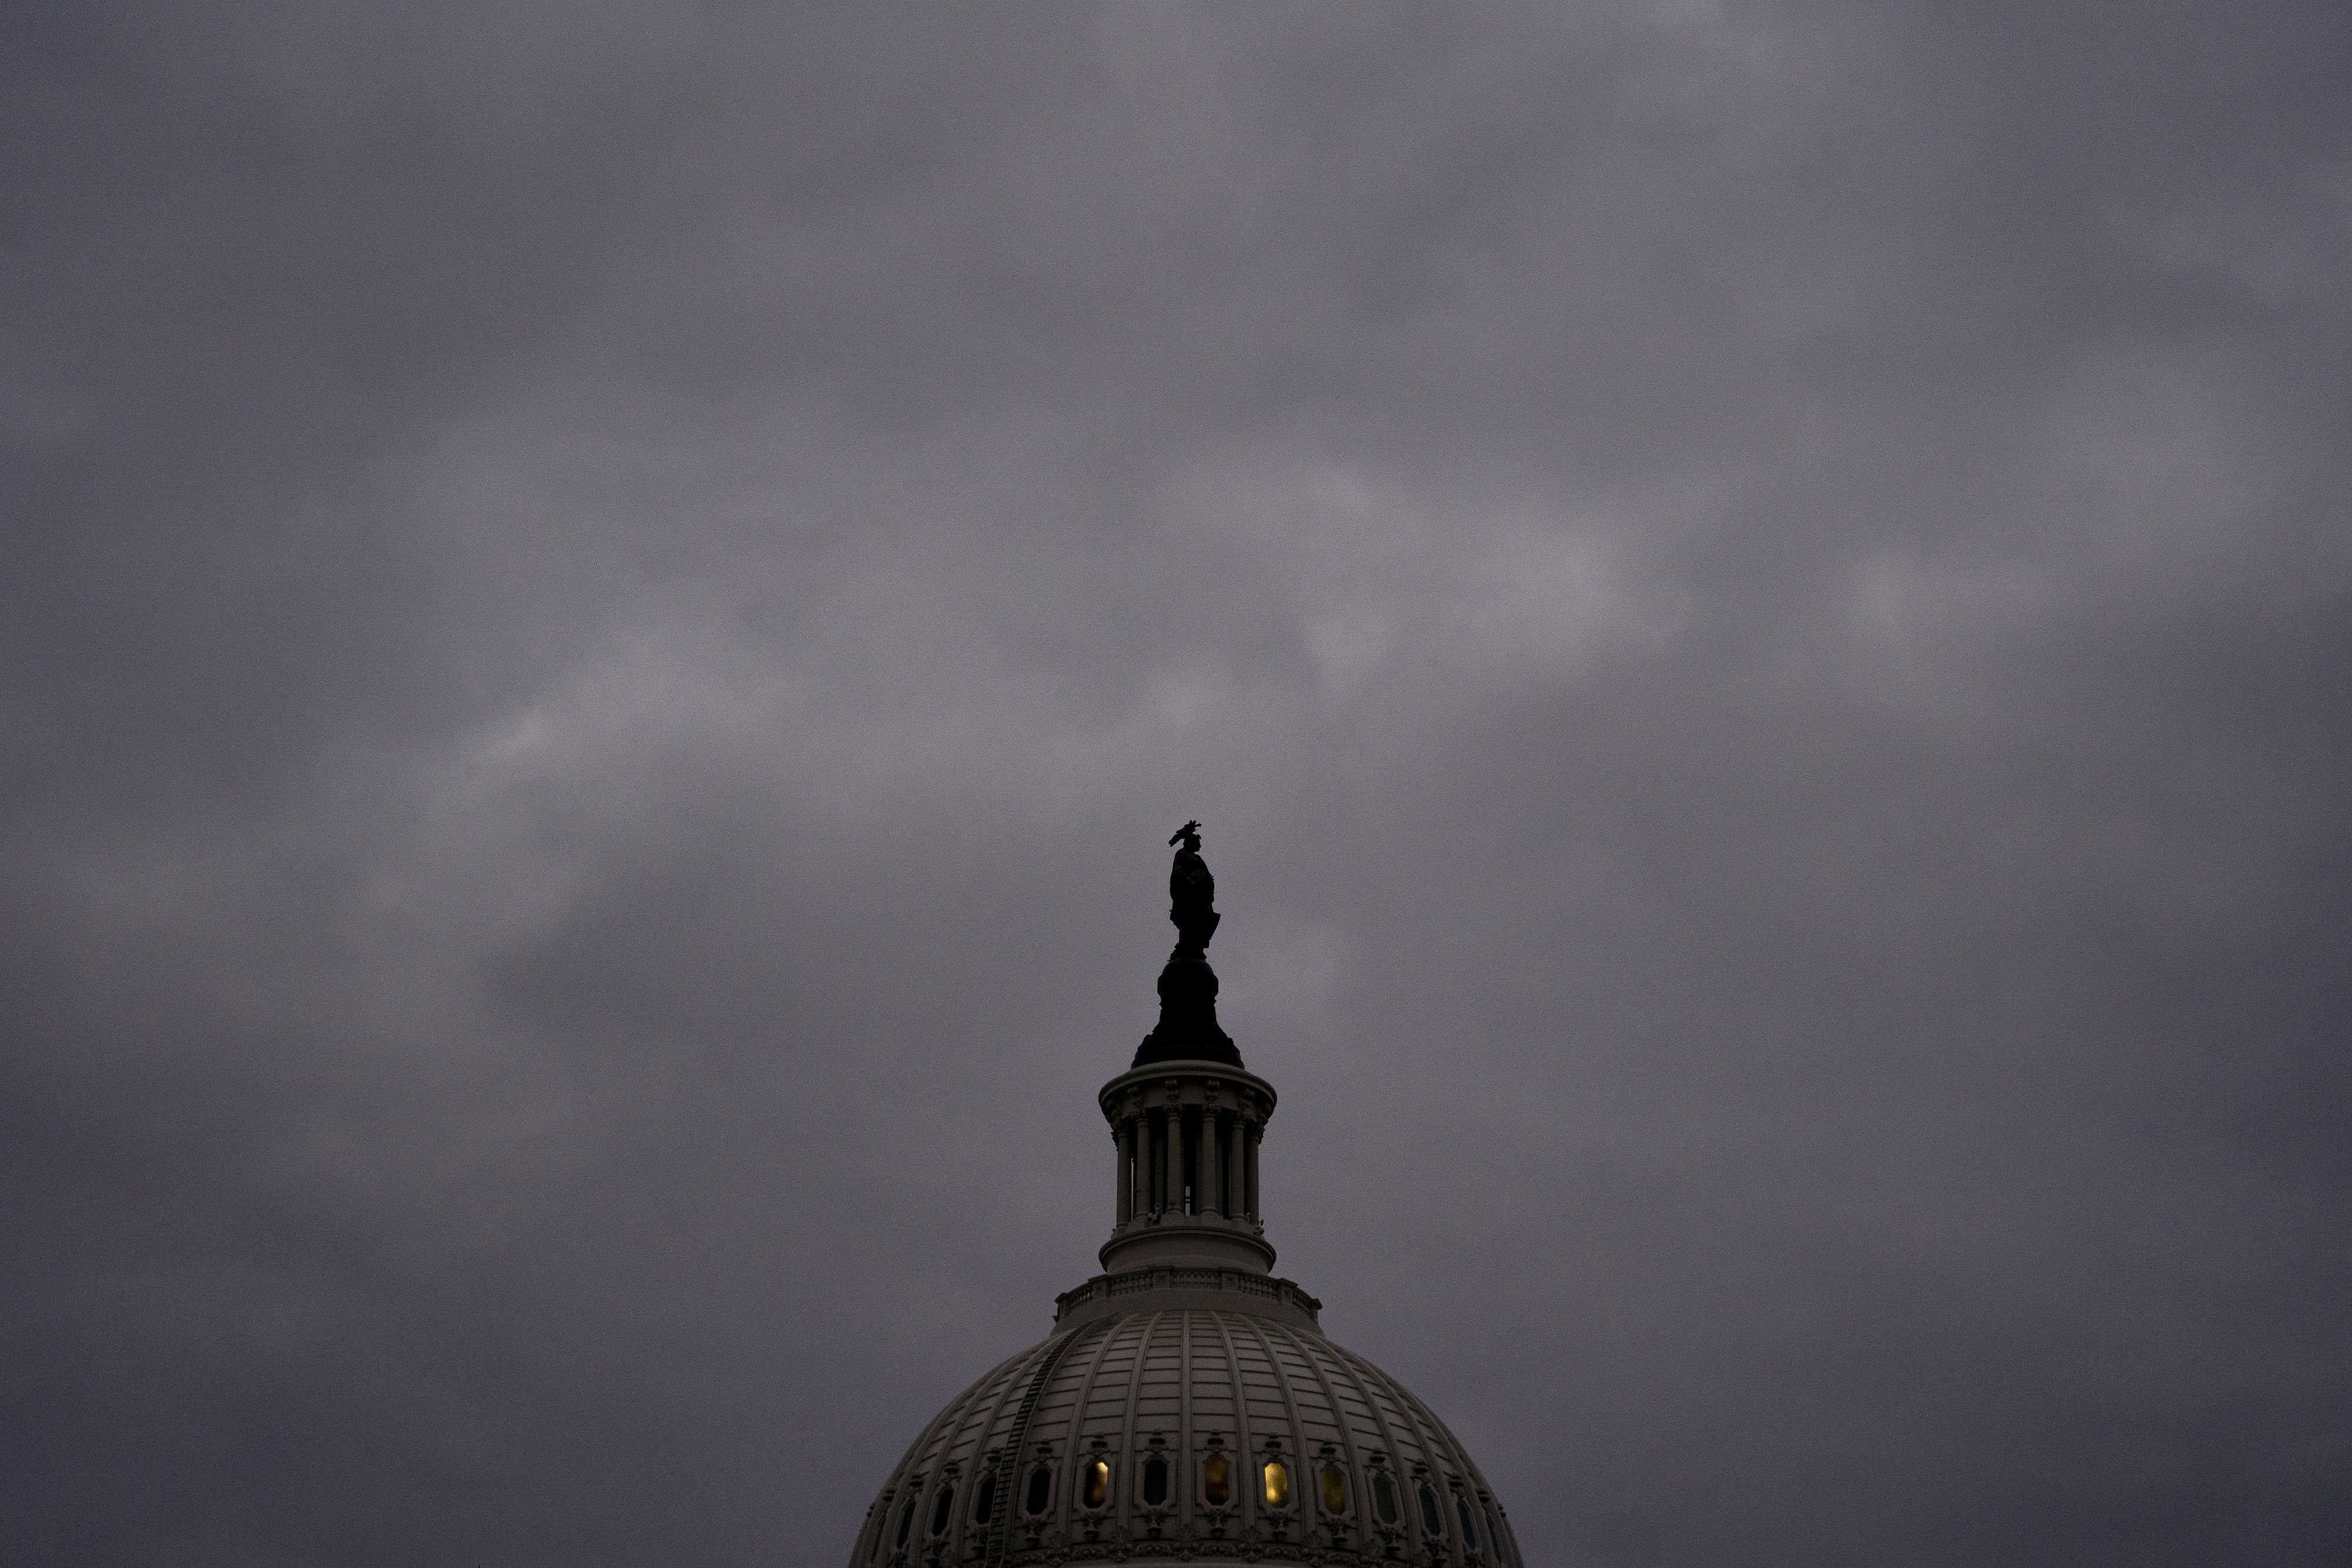 Clouds gather over the US Capitol in Washington on December 10 when the Senate passed legislation creating a fast track to raising the nation’s debt ceiling. The US government’s rising fiscal debt is a factor that could constrain the Fed’s ability to raise interest rates. Photo: Bloomberg